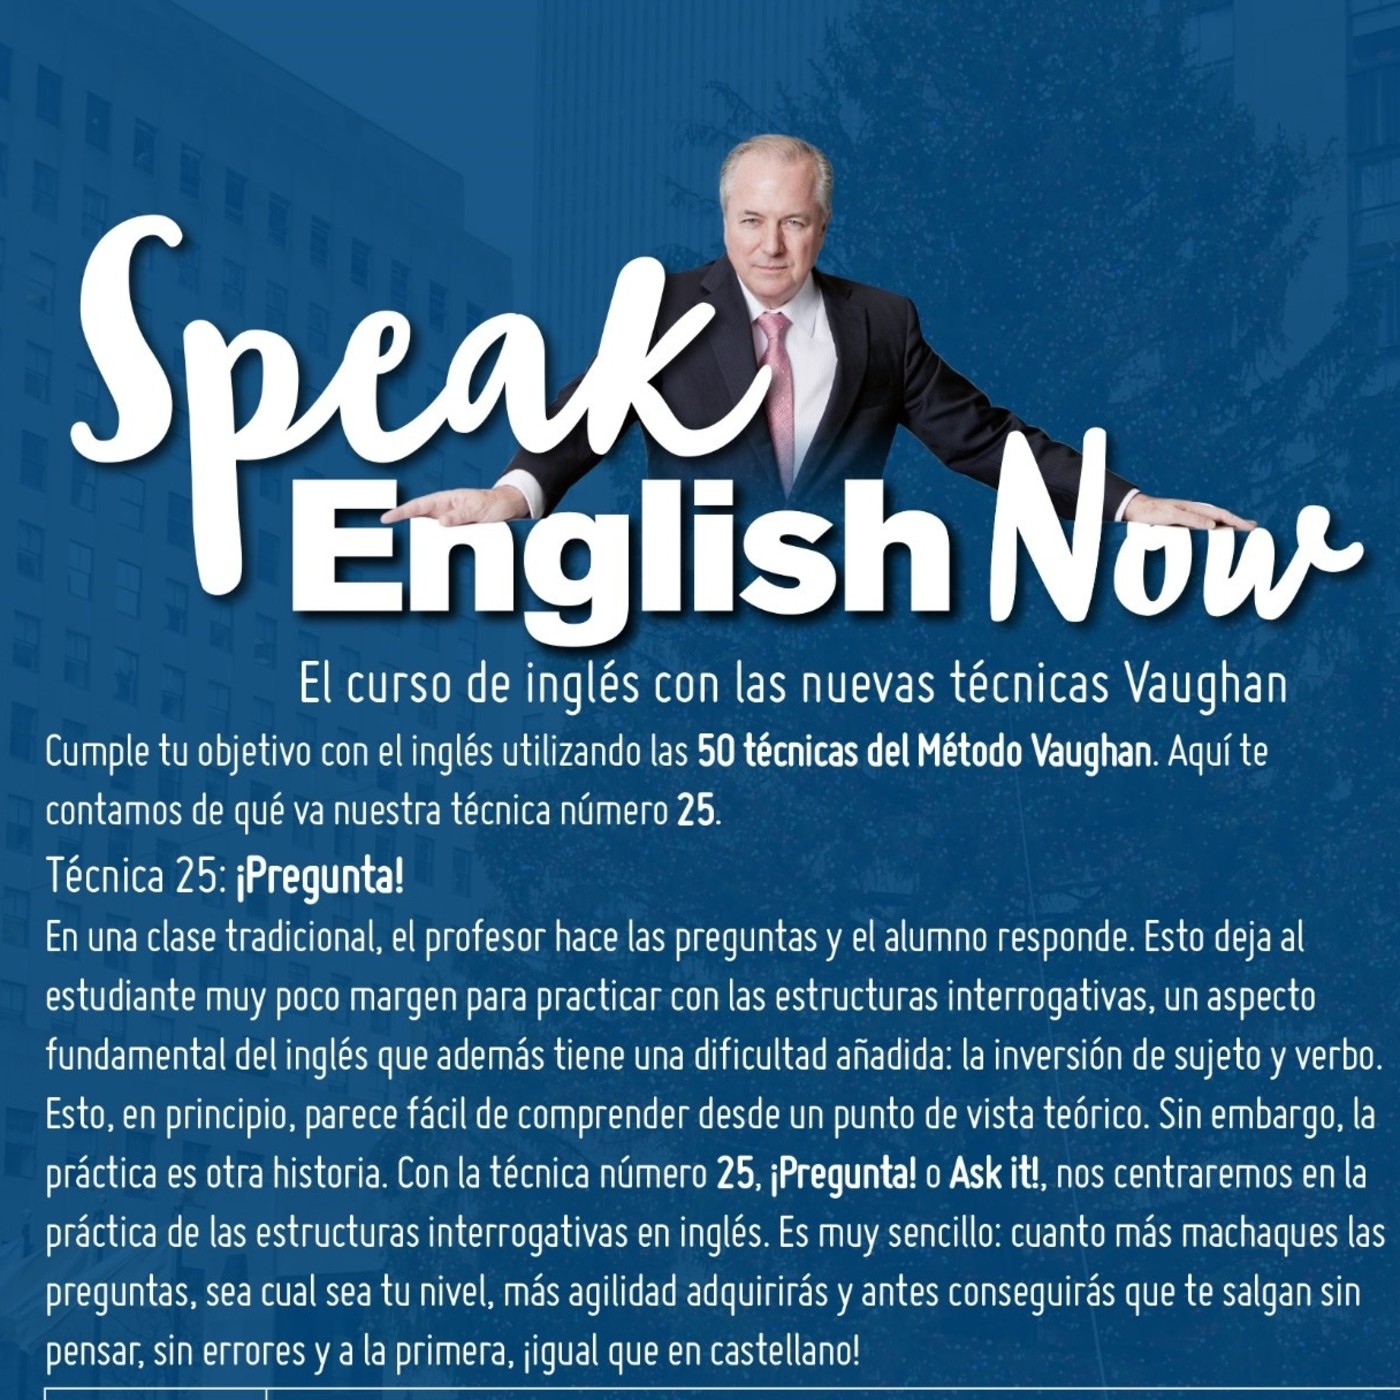 Speak English Now by Vaughan Libro 9